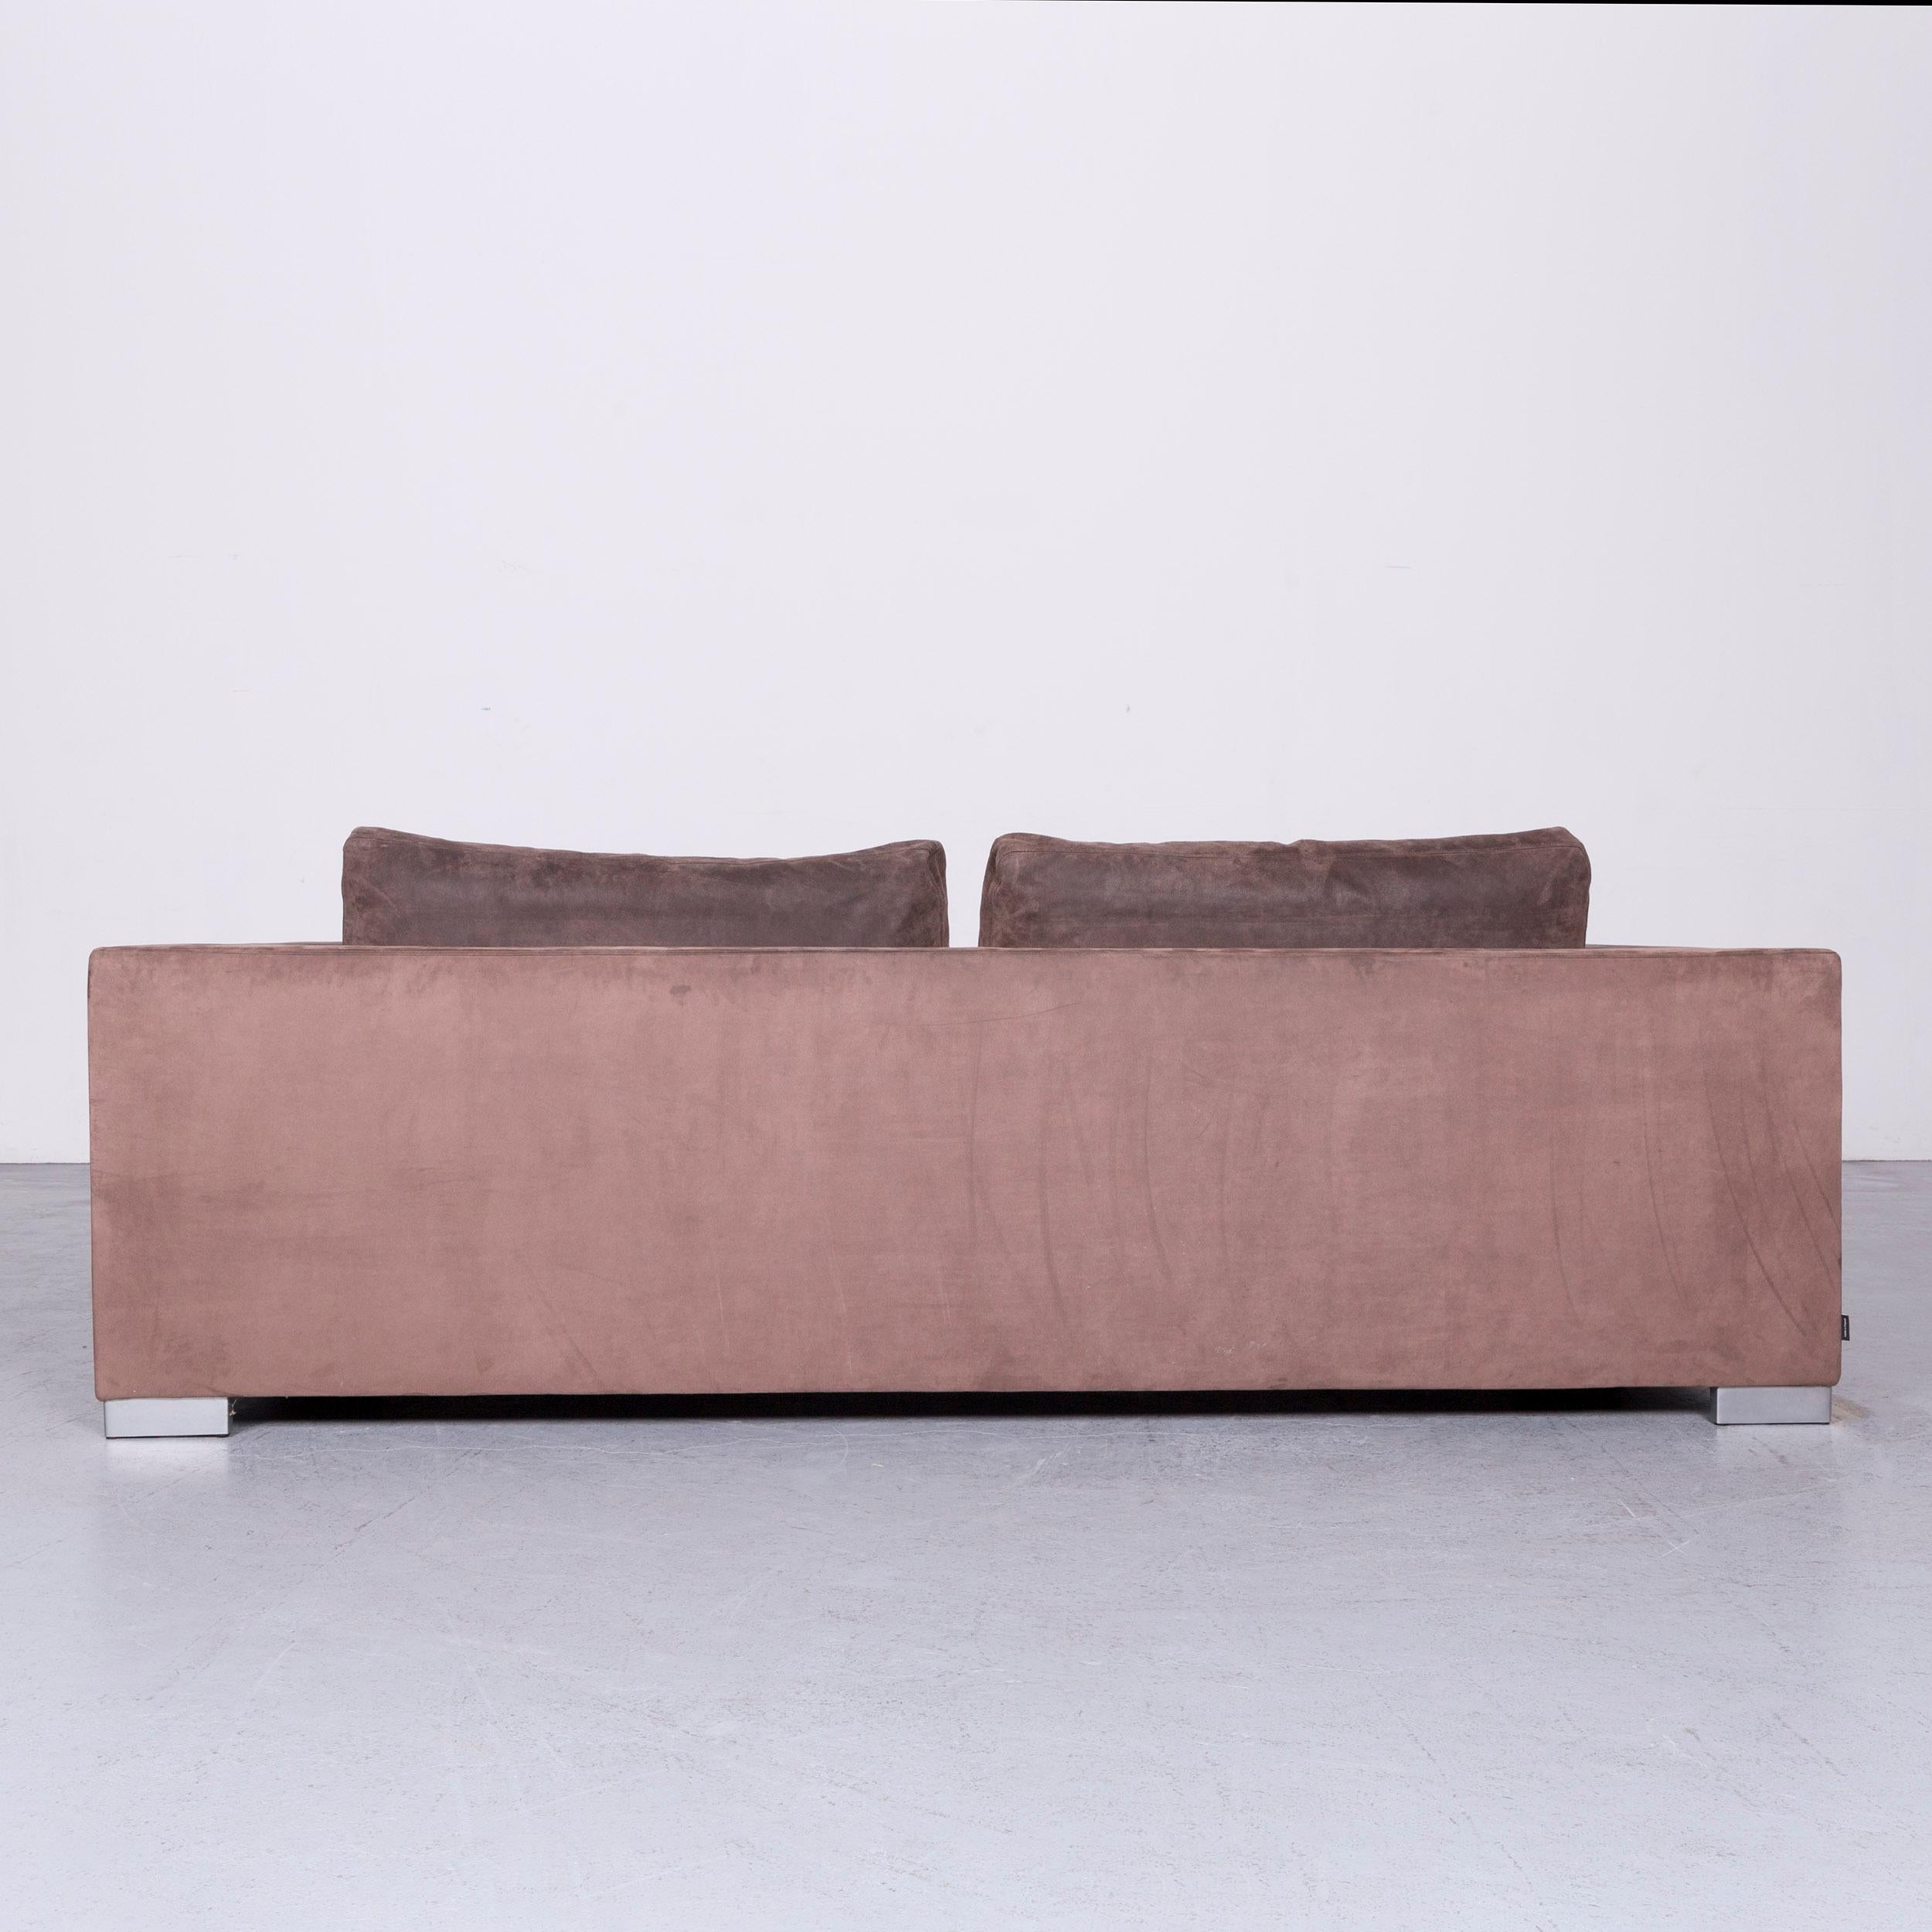 Ligne Roset Rive Gauche Designer Fabric Sofa Footstool Set Brown Two-Seat Couch 4